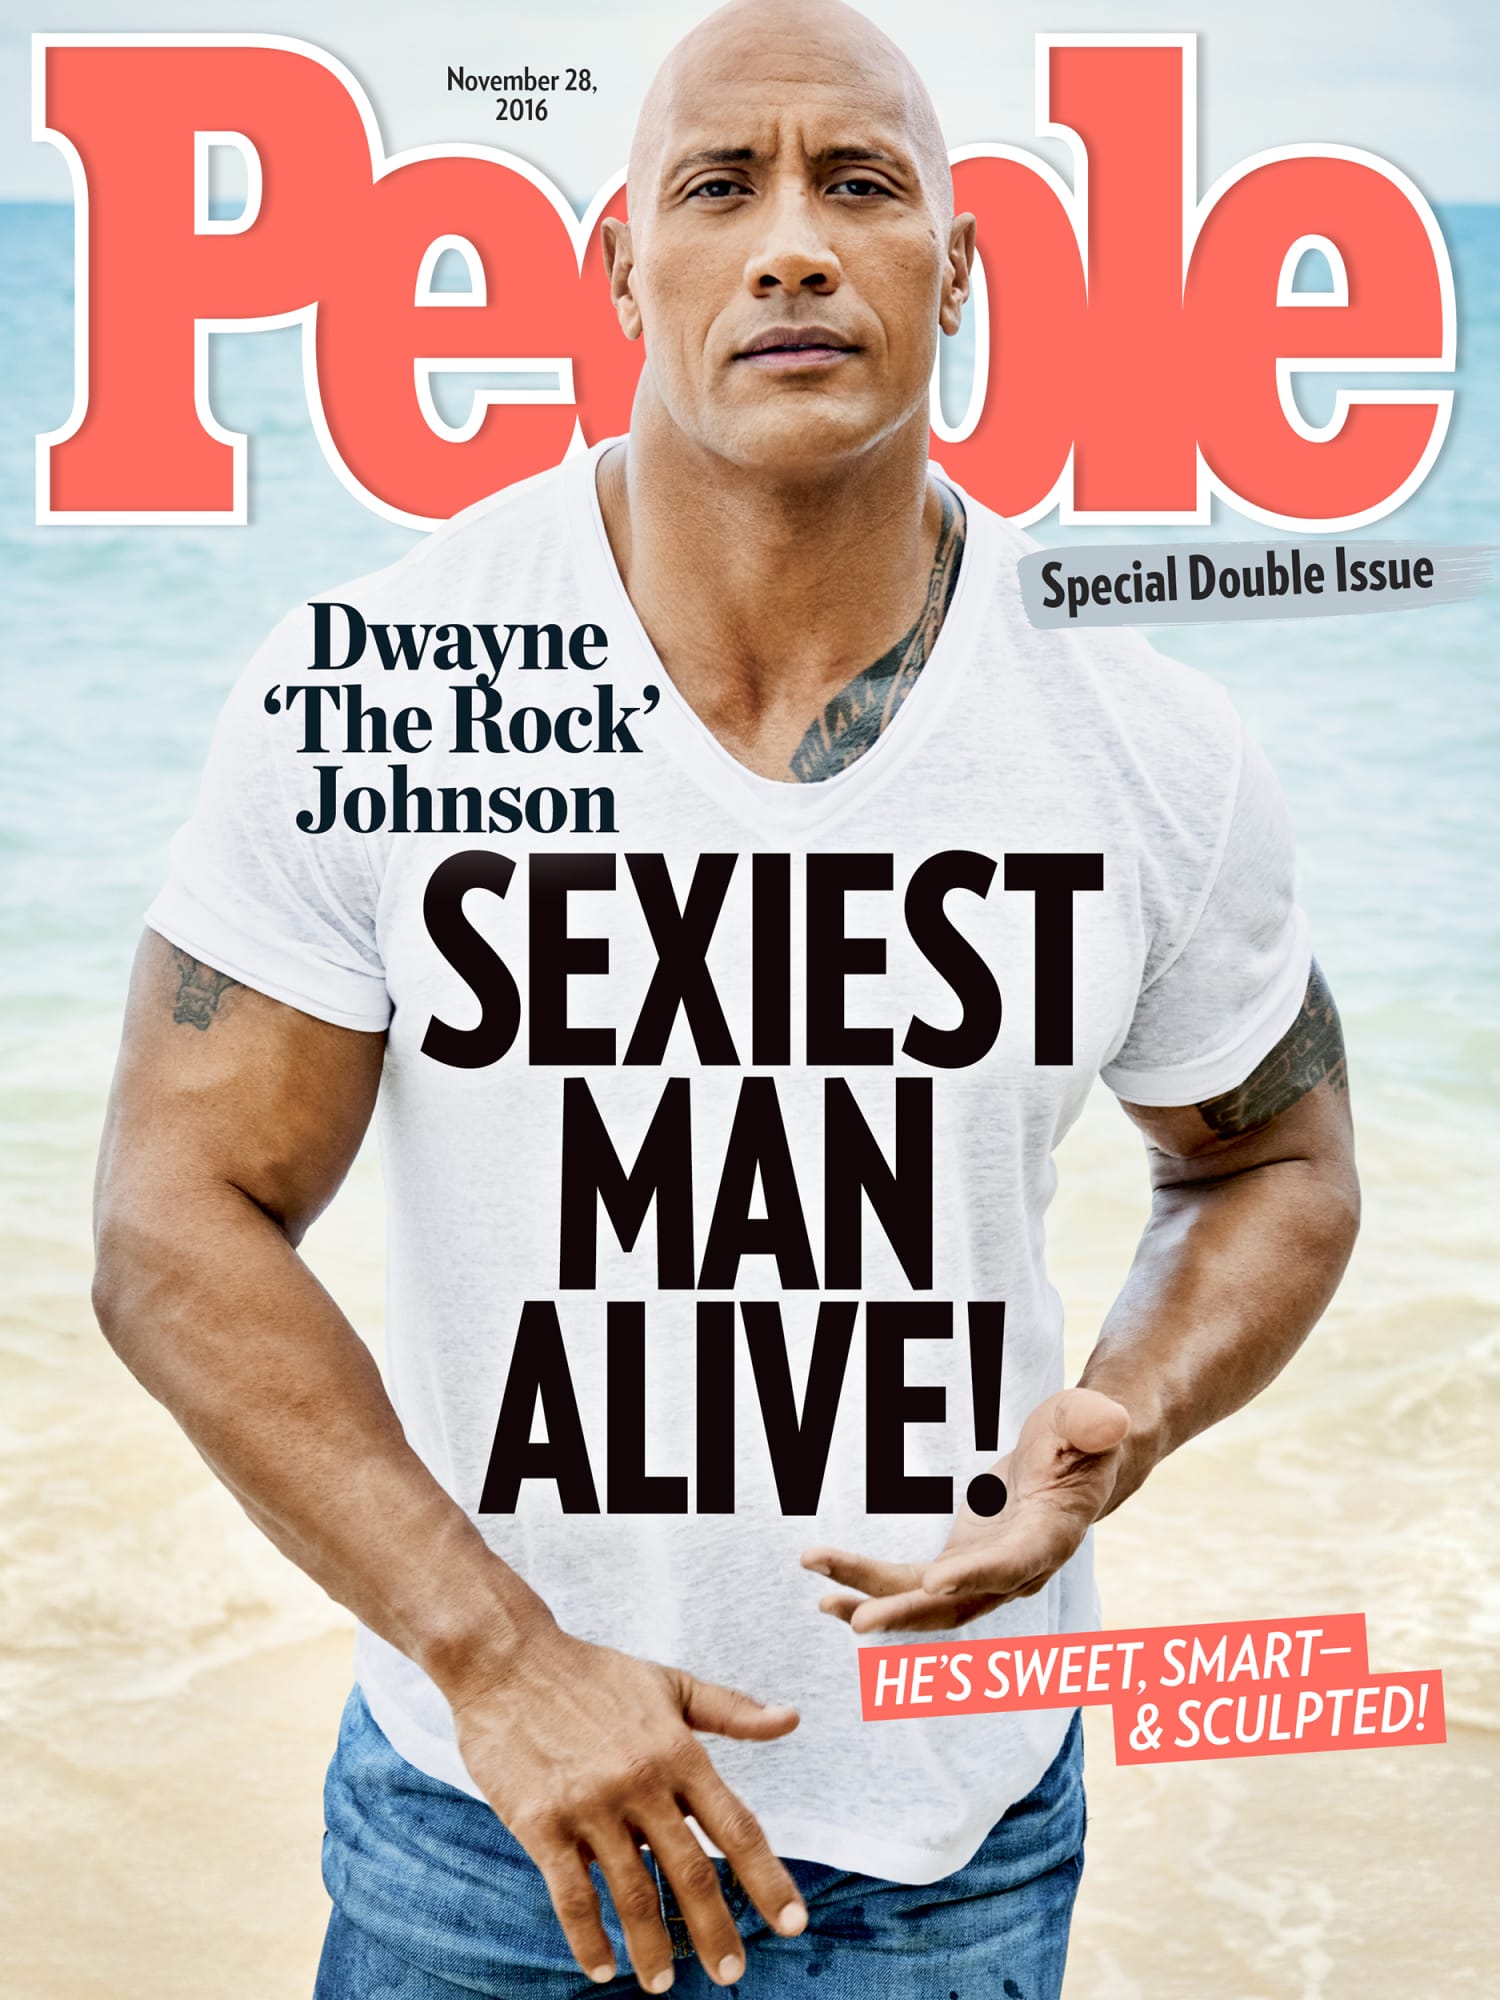 Dwayne 'The Rock' Johnson named People's Sexiest Man Alive